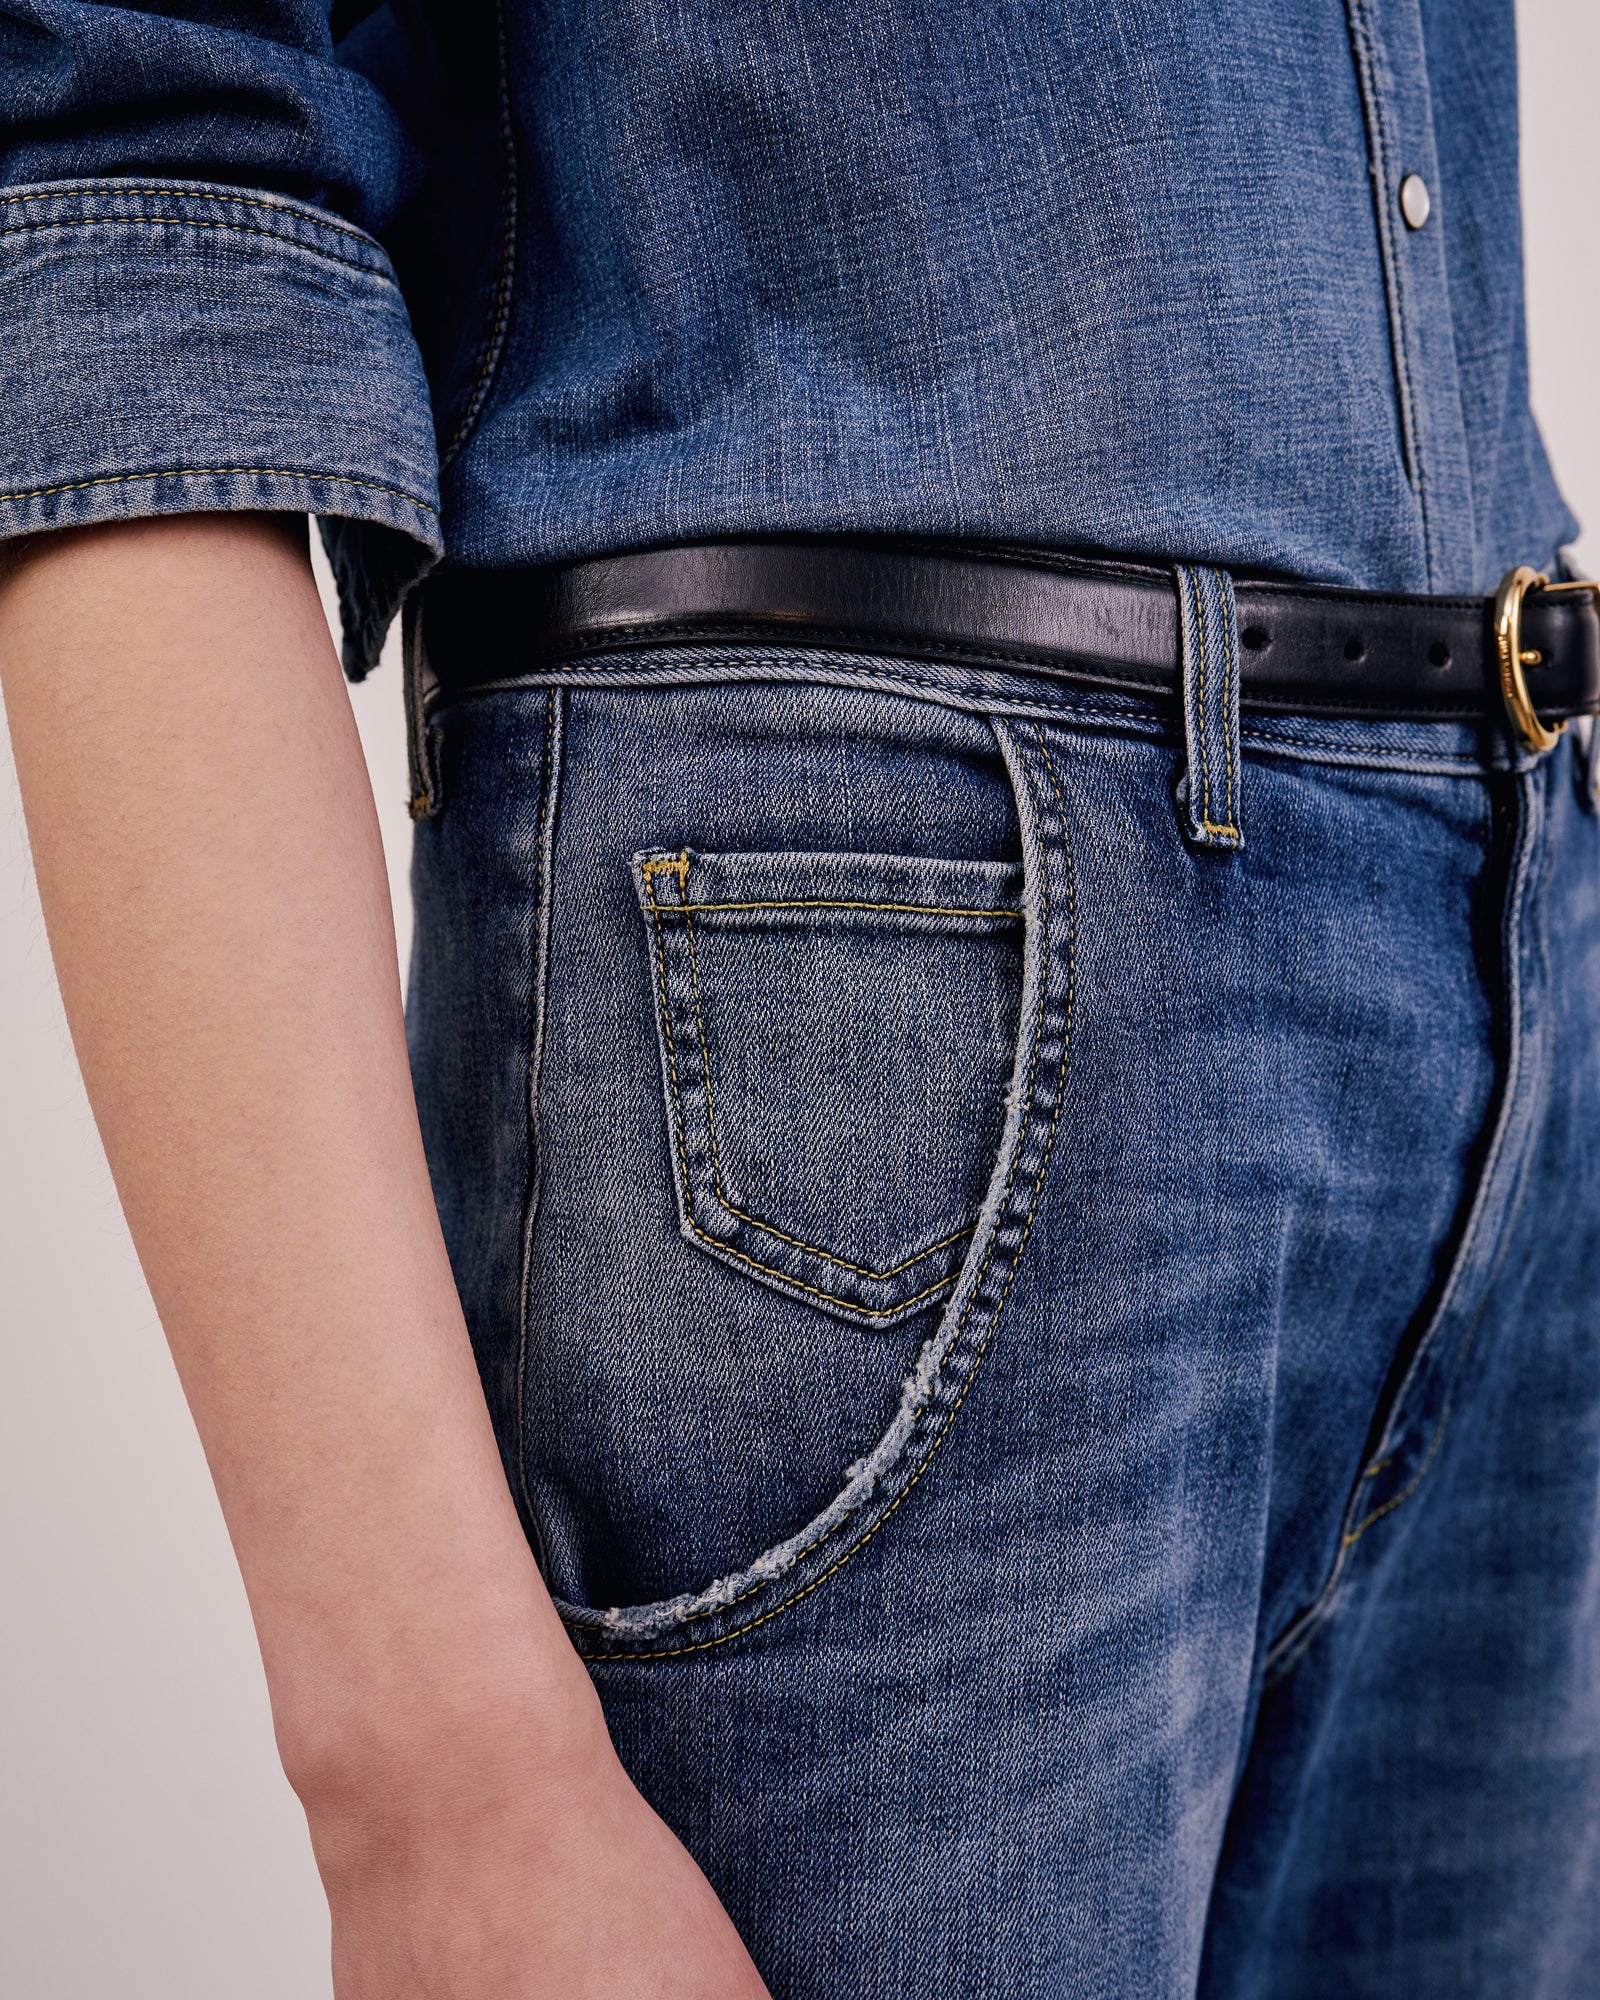 NILI LOTAN Emerson Jeans in Classic Washed